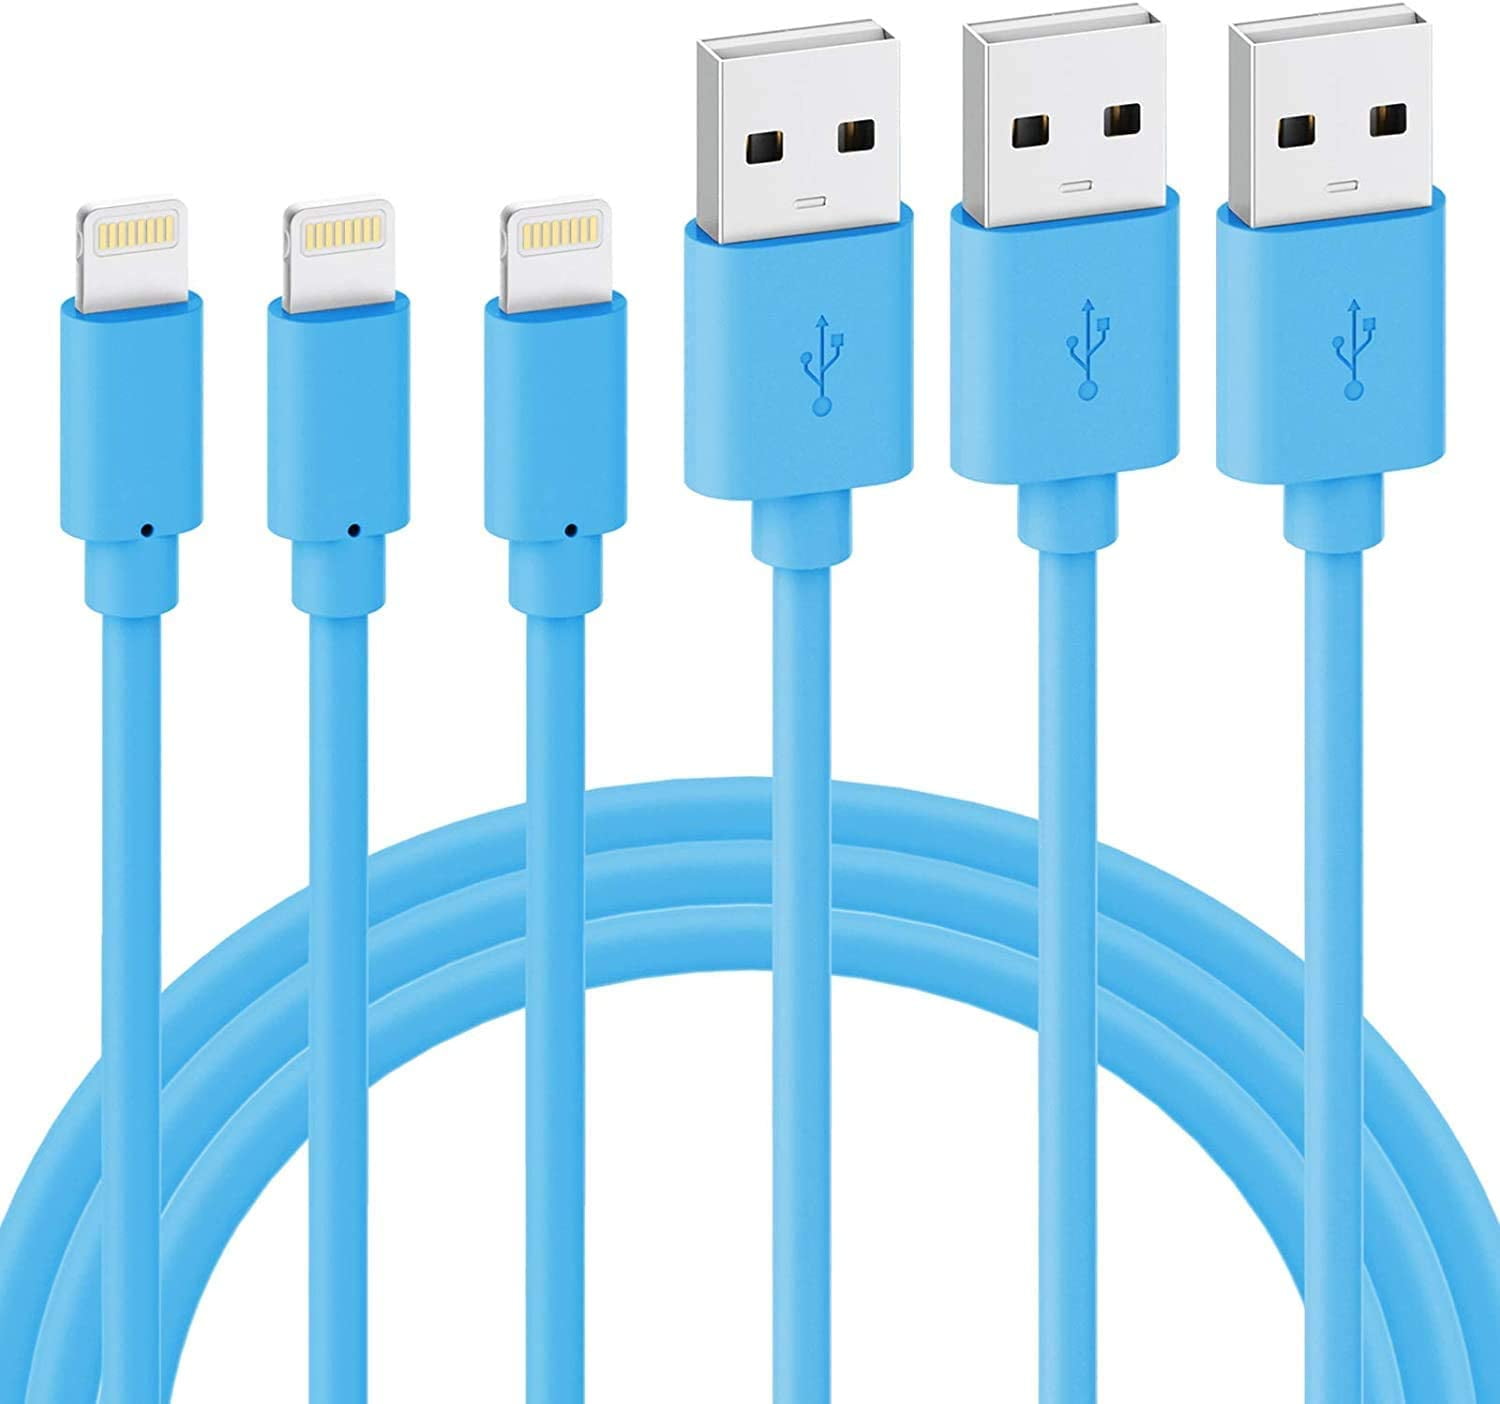 Quntis Lightning Cable Certificated 3 Pack 6ft iPhone Cord for iPhone X 8 8 Plus 7 7 Plus 6s 6s Plus 6 6 Plus SE 5s 5c 5 iPad Mini iPad Air iPad Pro iPod and More Blue